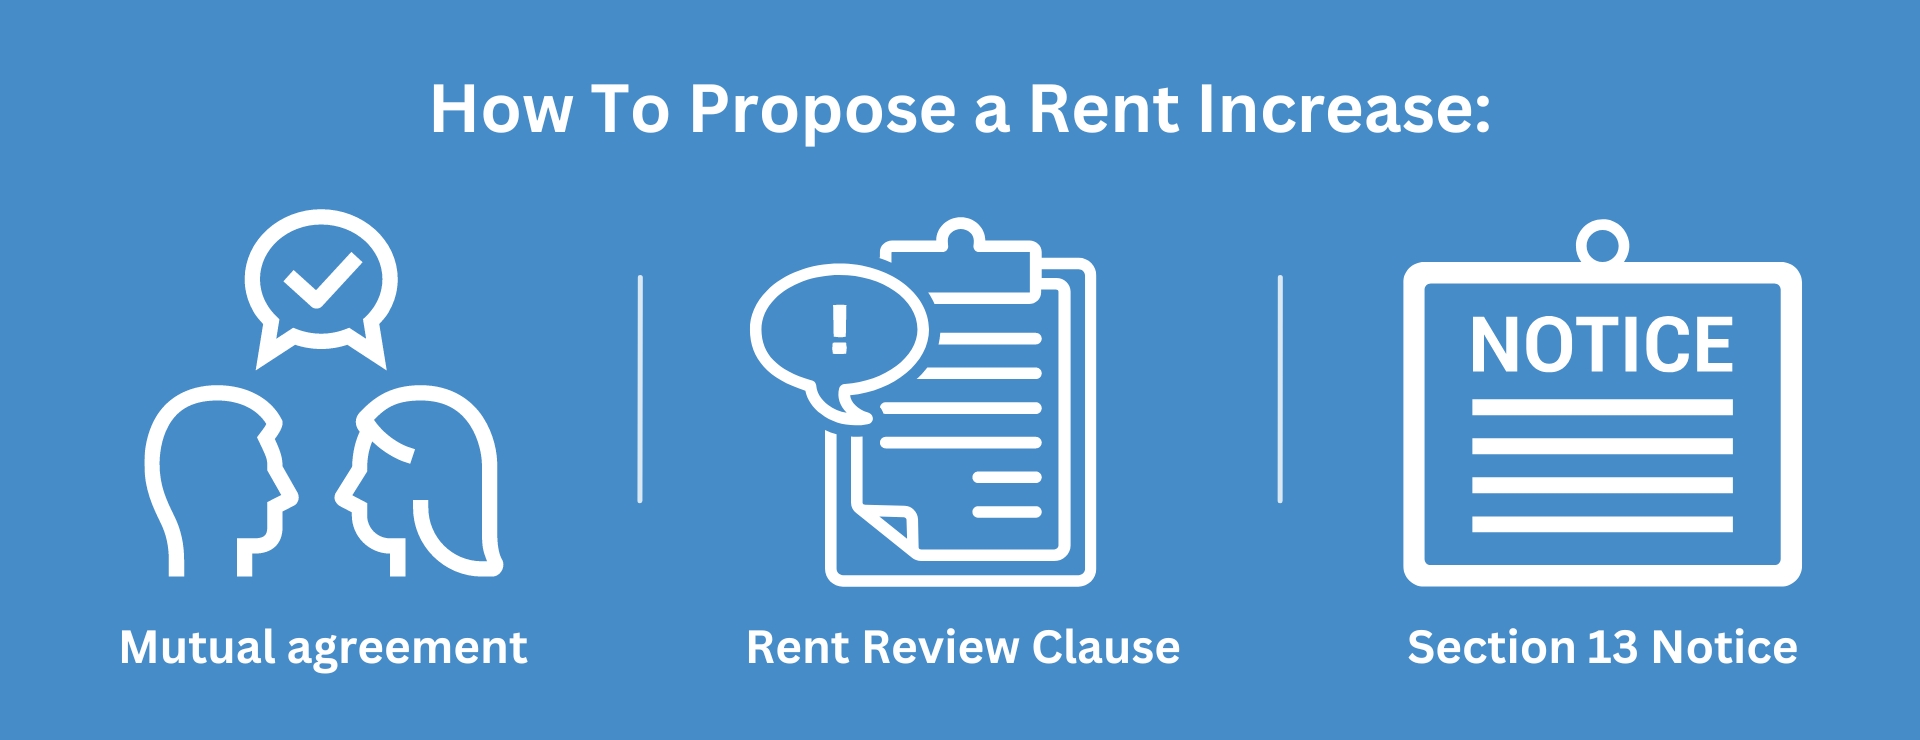 how to propose a rent increase infographic